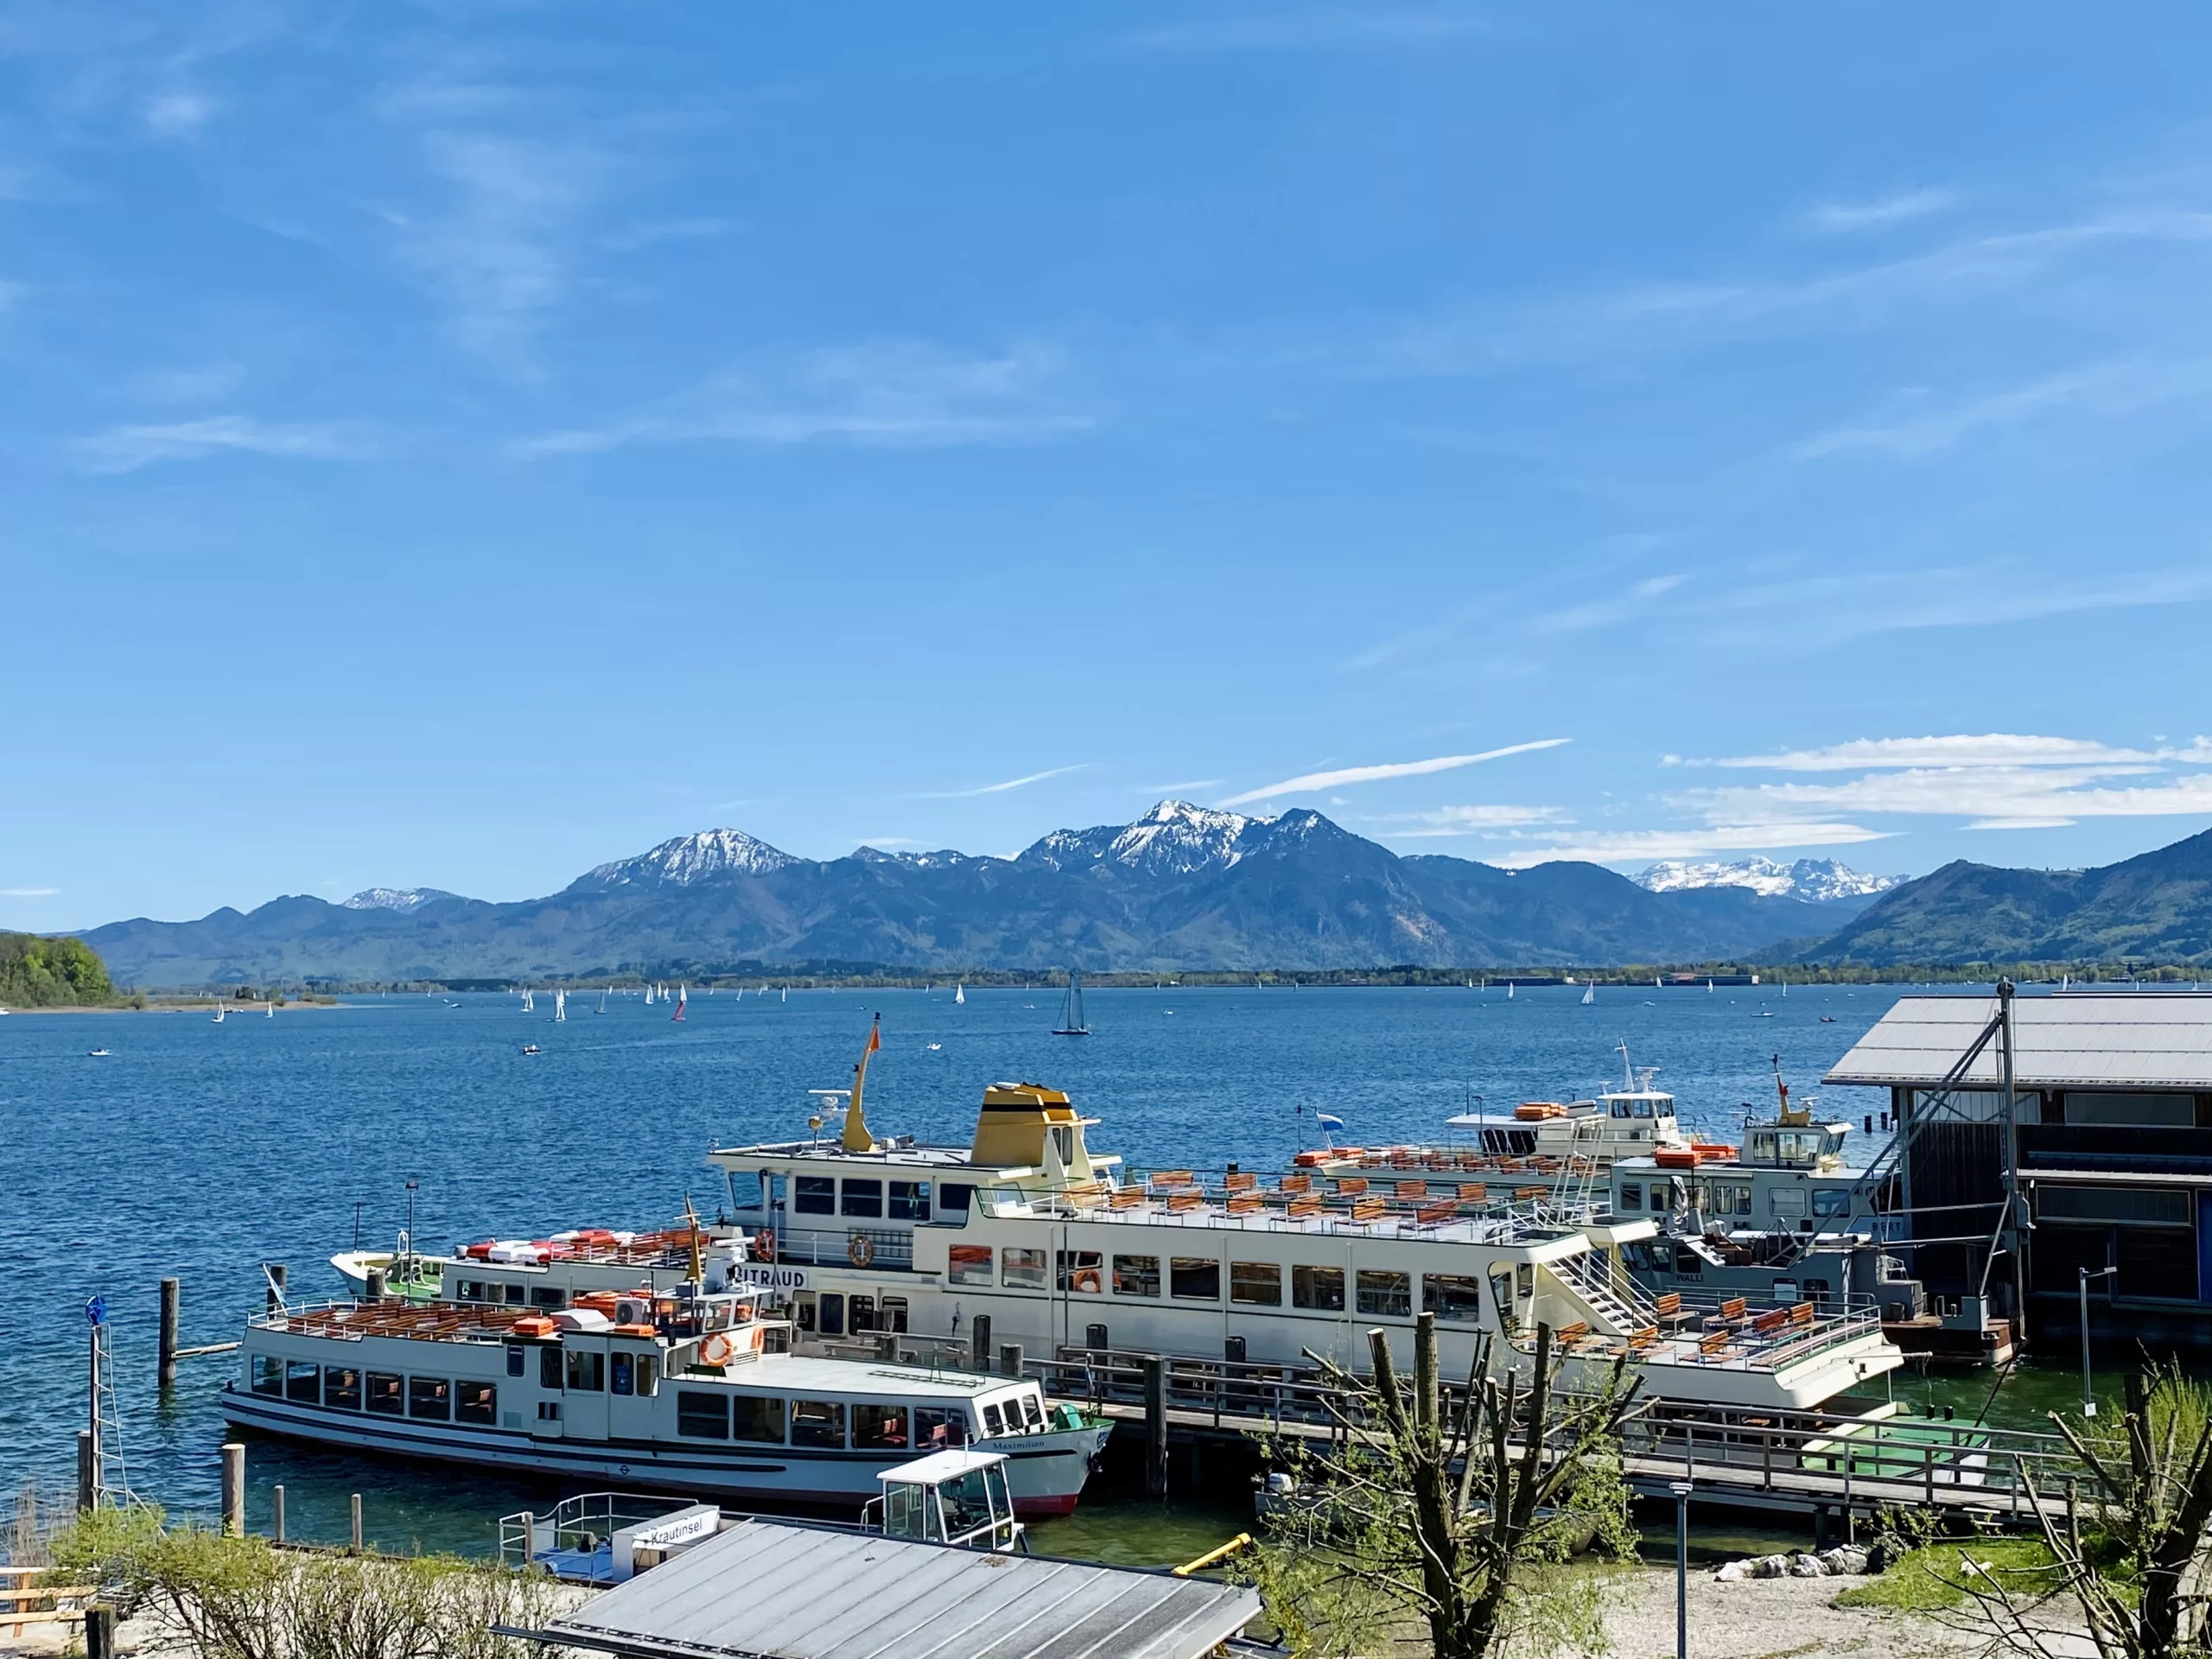 Lake Chiemsee, in Bavaria, Germany has a stunning view of the Alps.